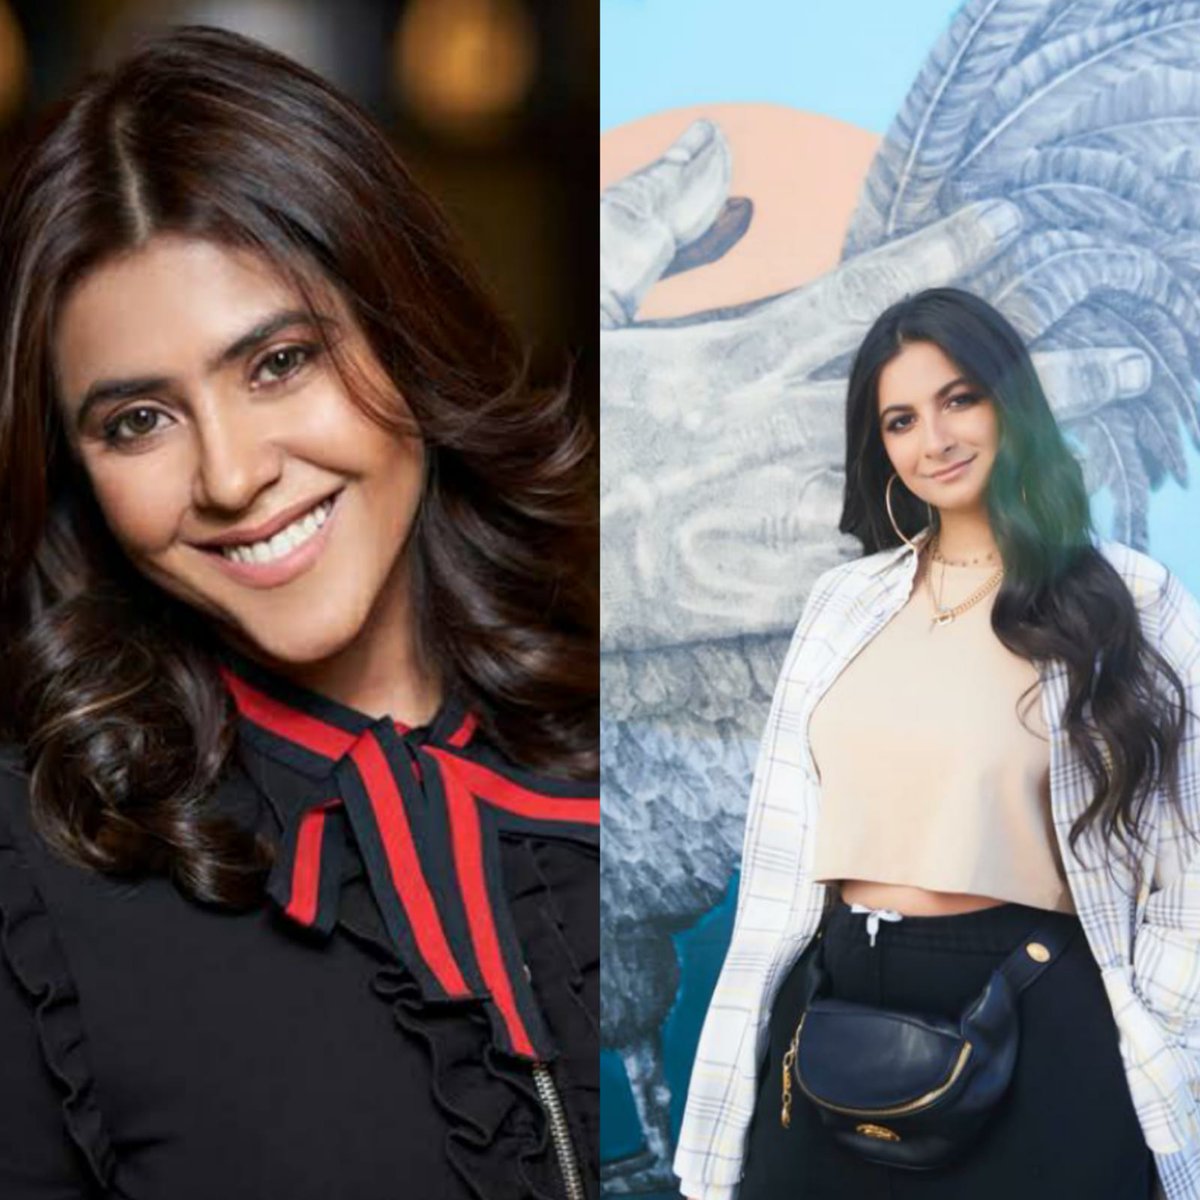 EKTA KAPOOR & RHEA KAPOOR team up for a new film. After #VeereDiWedding and #TheCrew, their next will release on September 22, 2023. More details on this shortly. #EktaKapoor #RheaKapoor